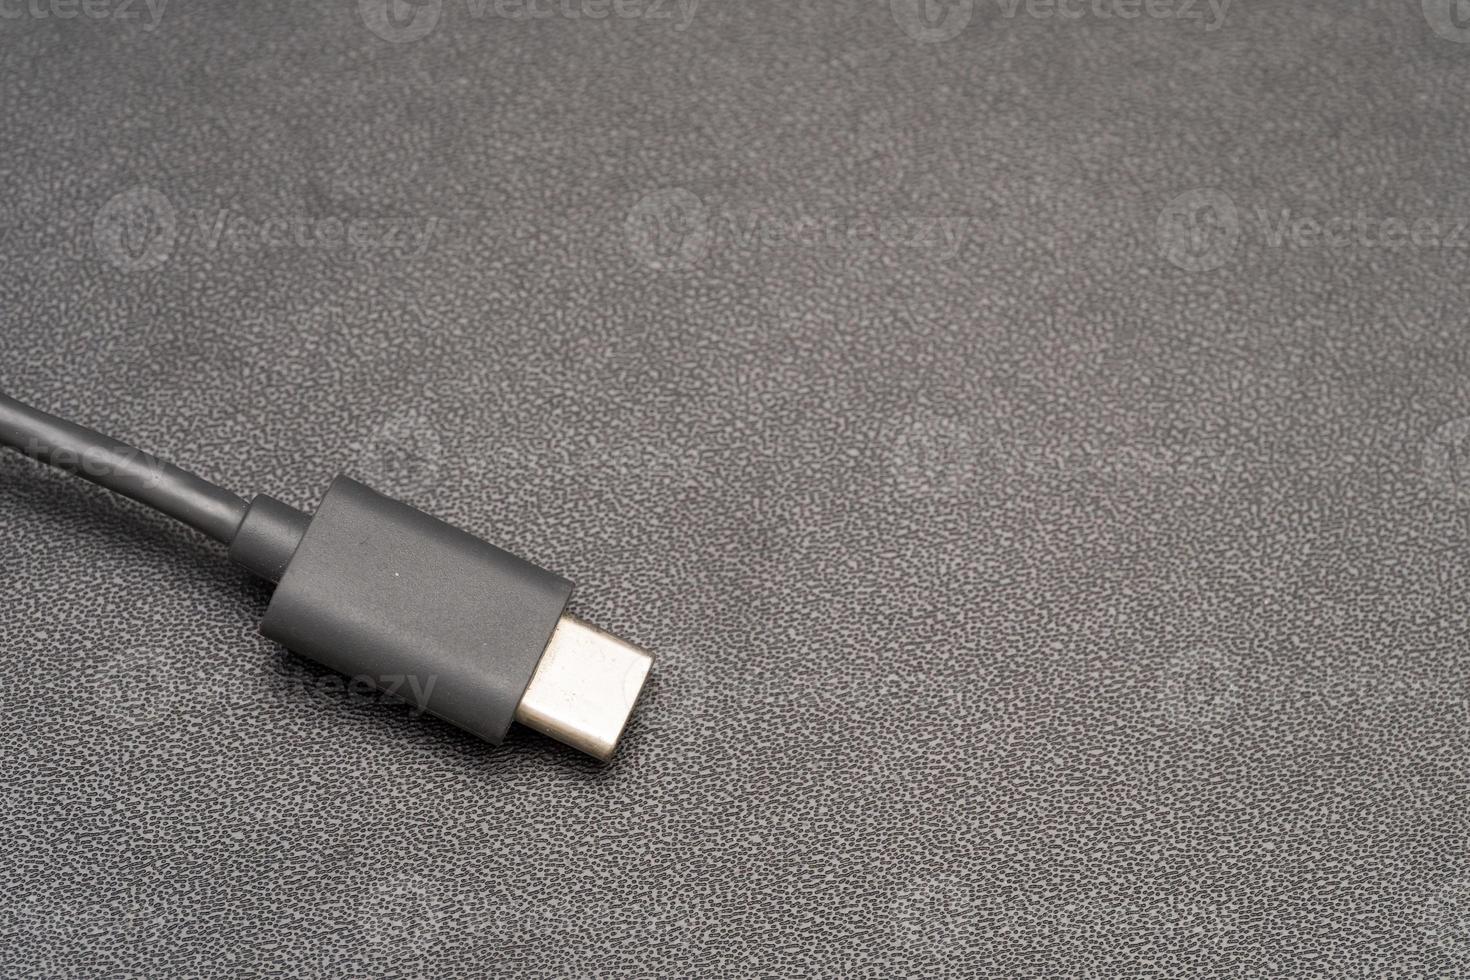 Close up of USB Type C connector with a grey cable on a dark background. Side close-up photo of grey type-c cable.